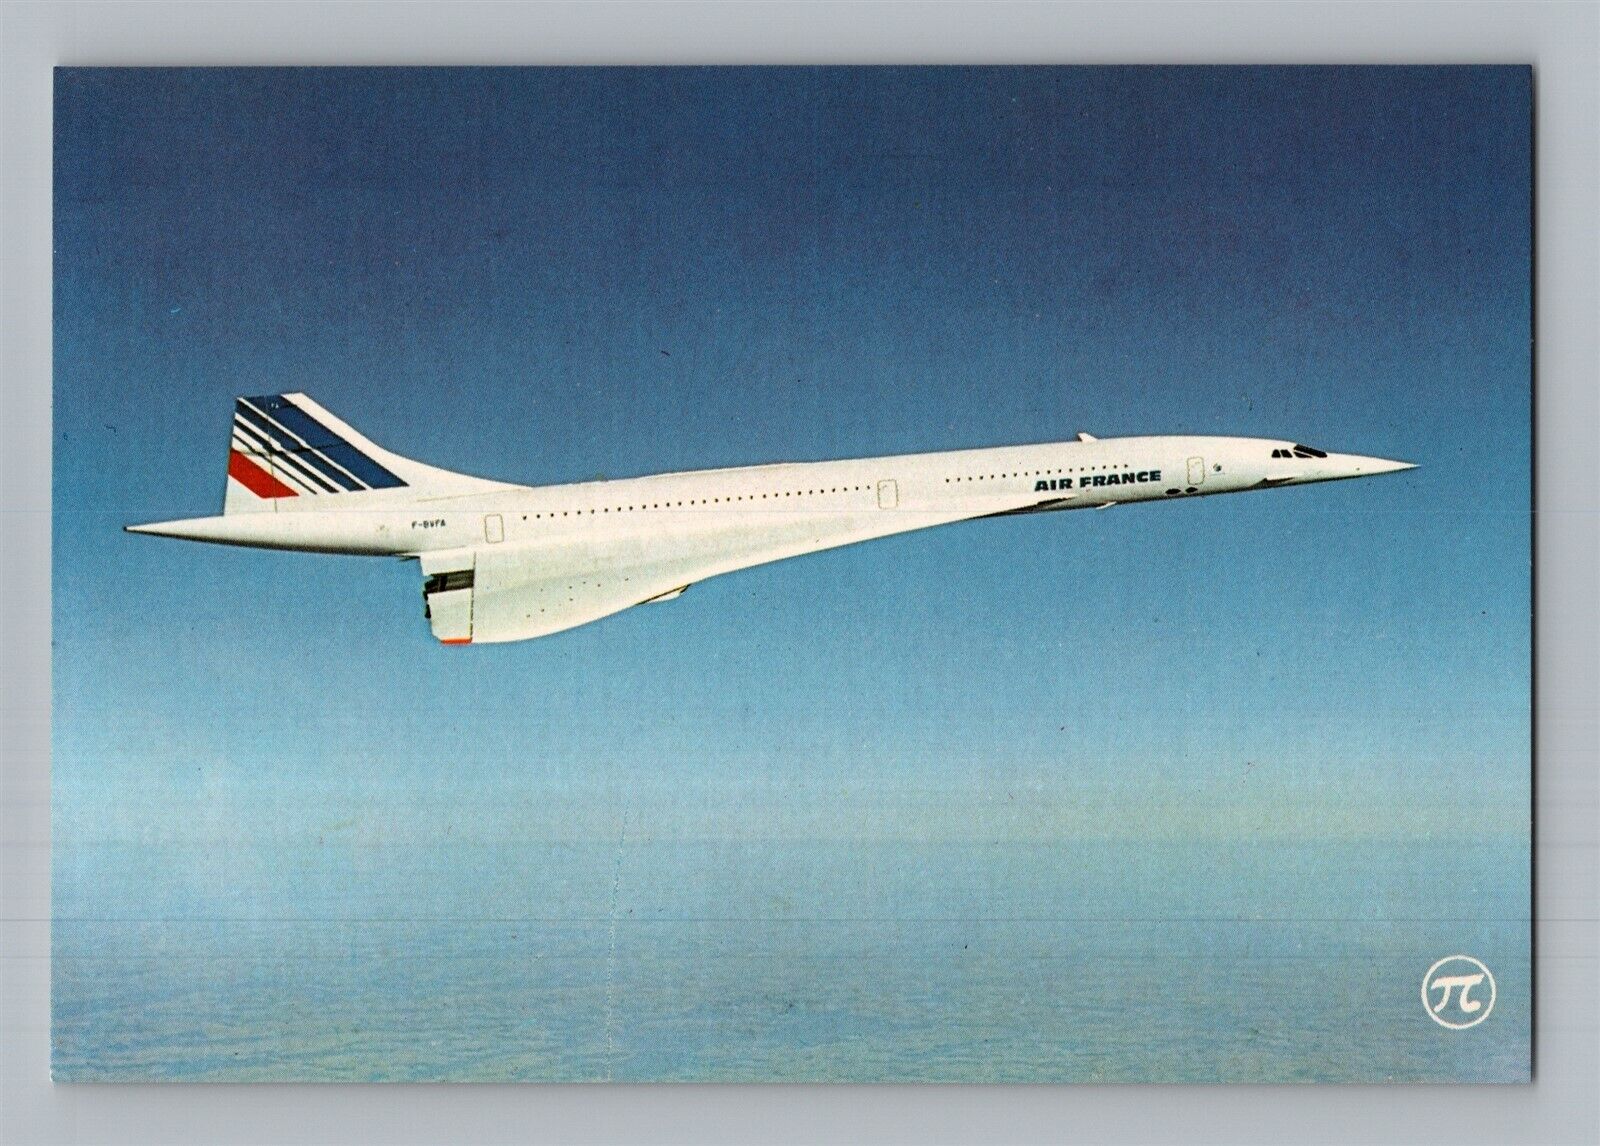 Aviation Airplane Postcard Air France Airlines Concorde #2 AP3